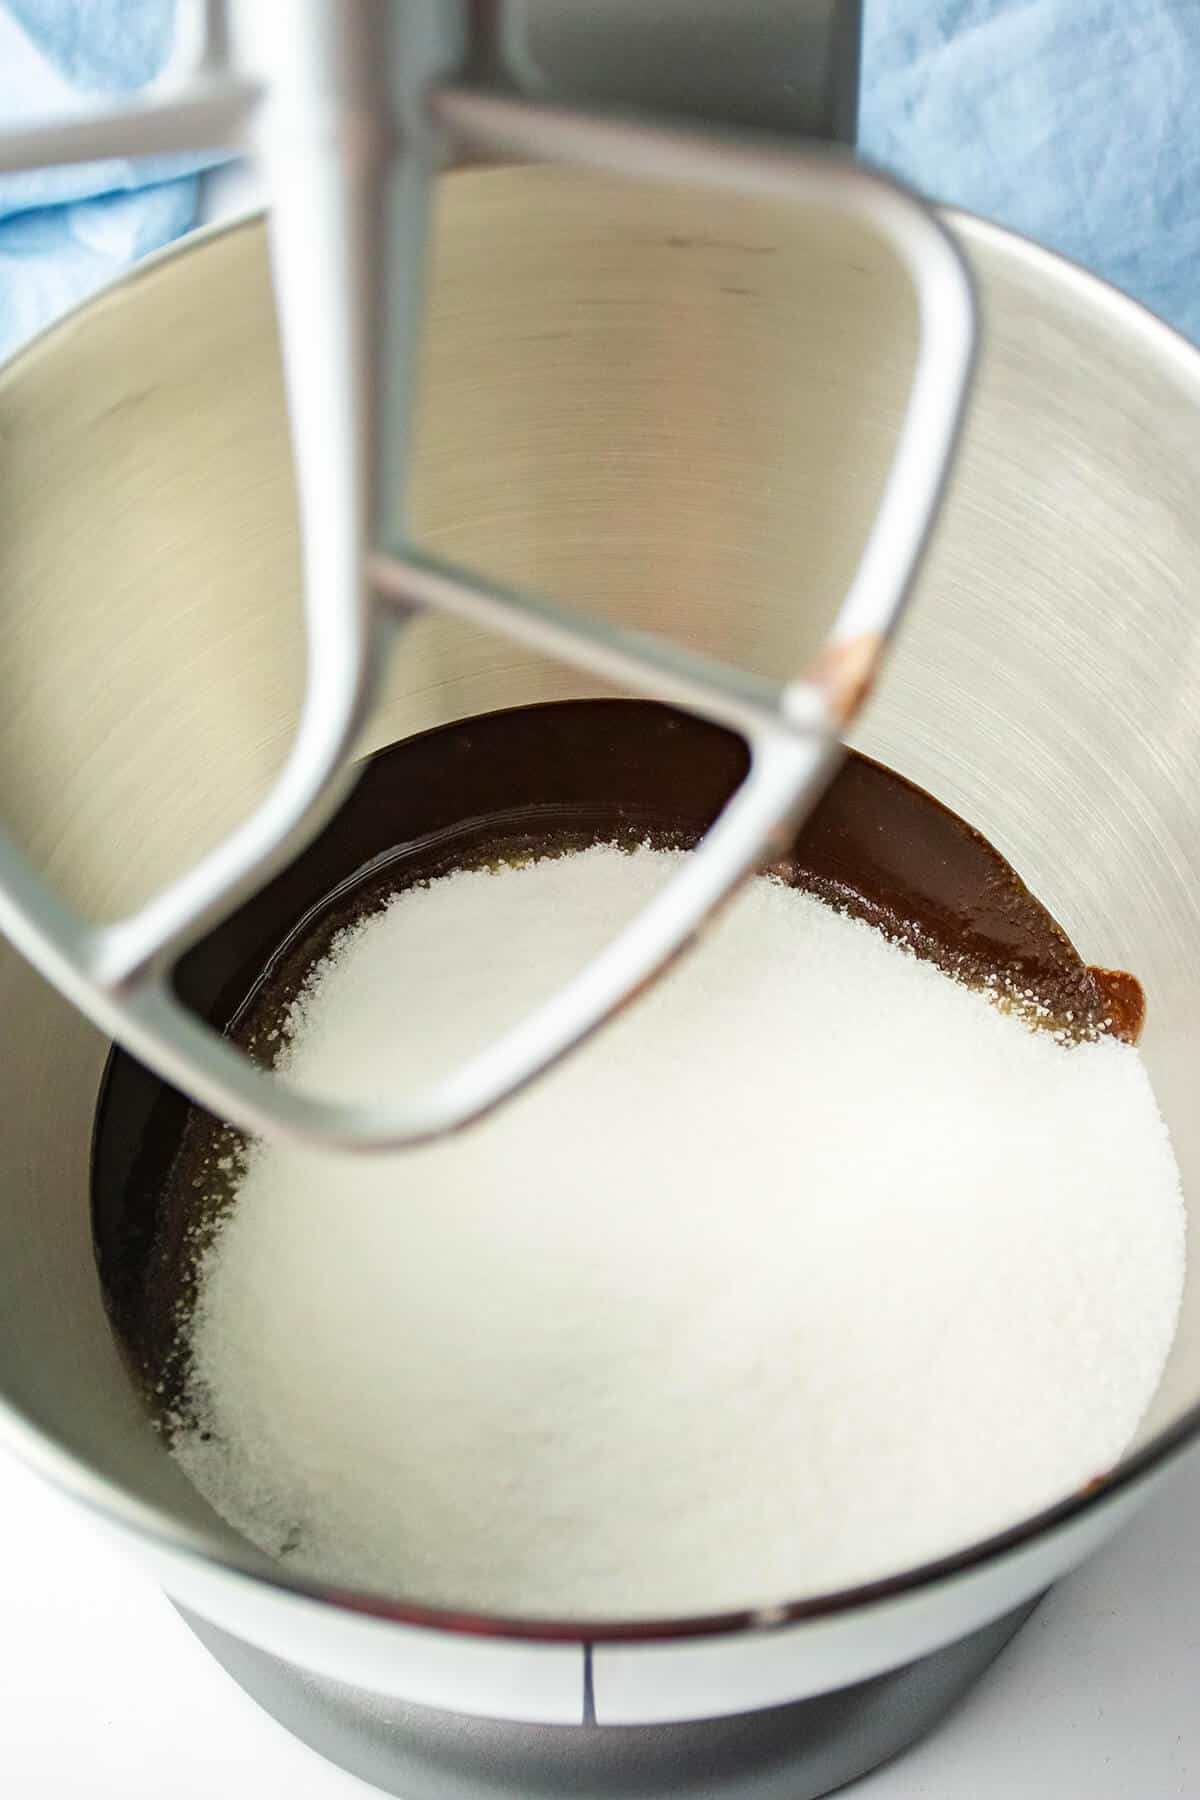 Sugar added to melted chocolate.